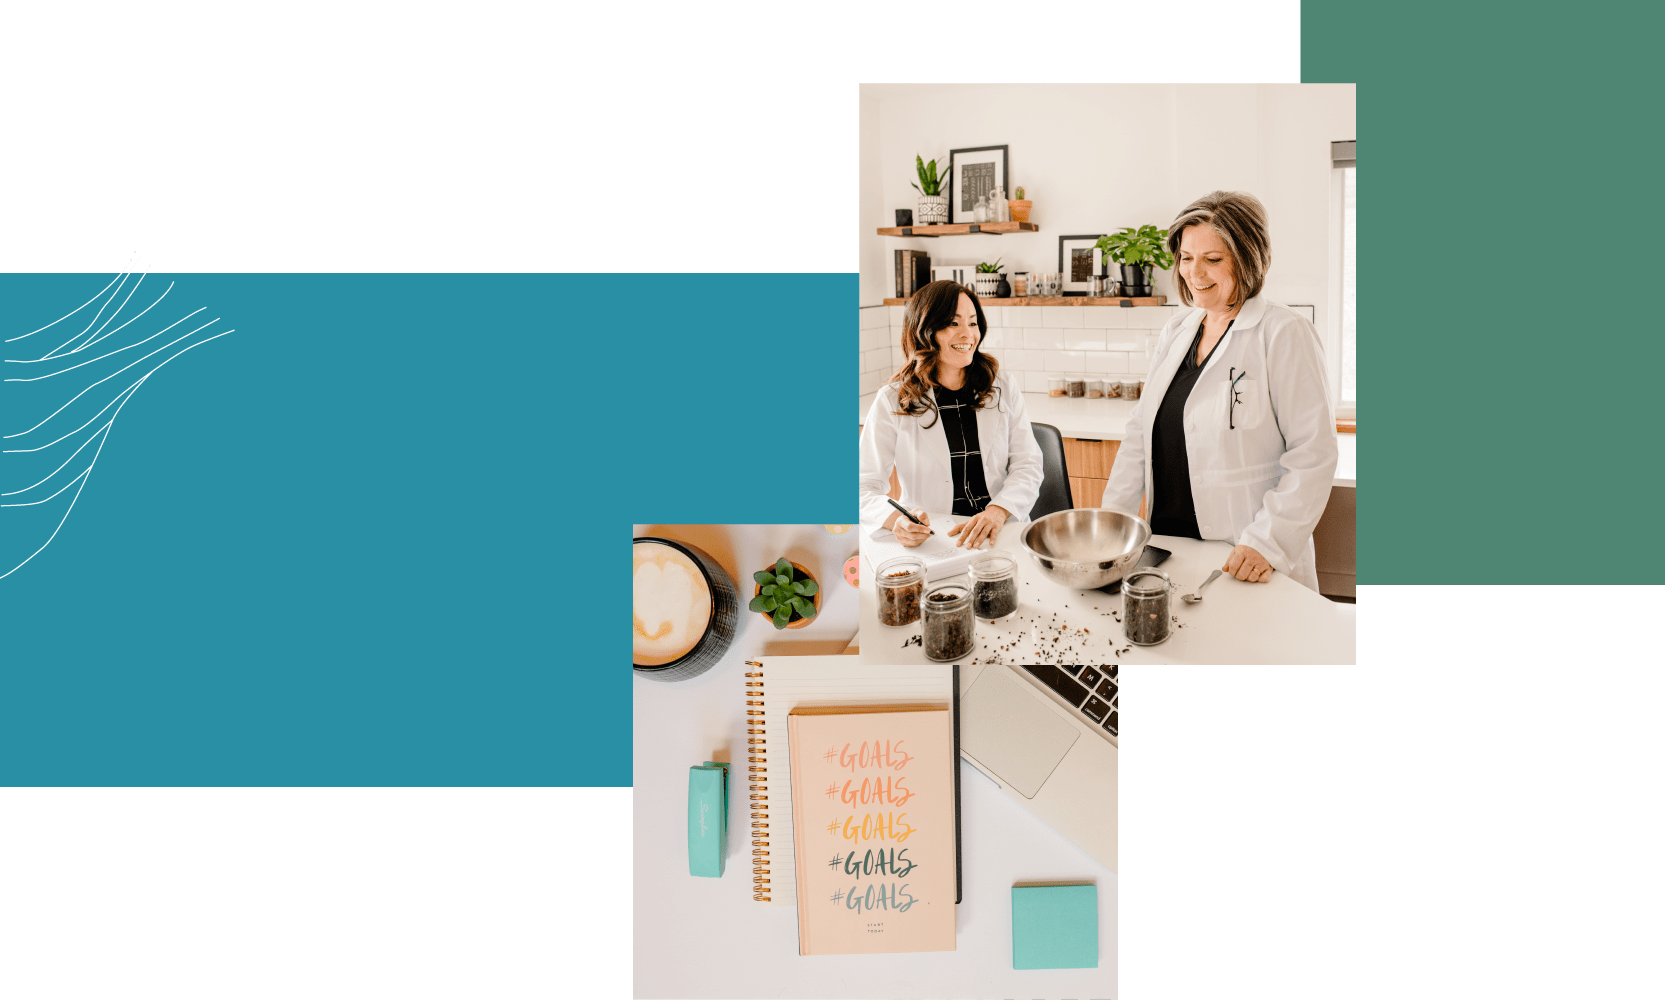 herbalist in kitchen and folder that says "goals" photos from a personal brand photographer